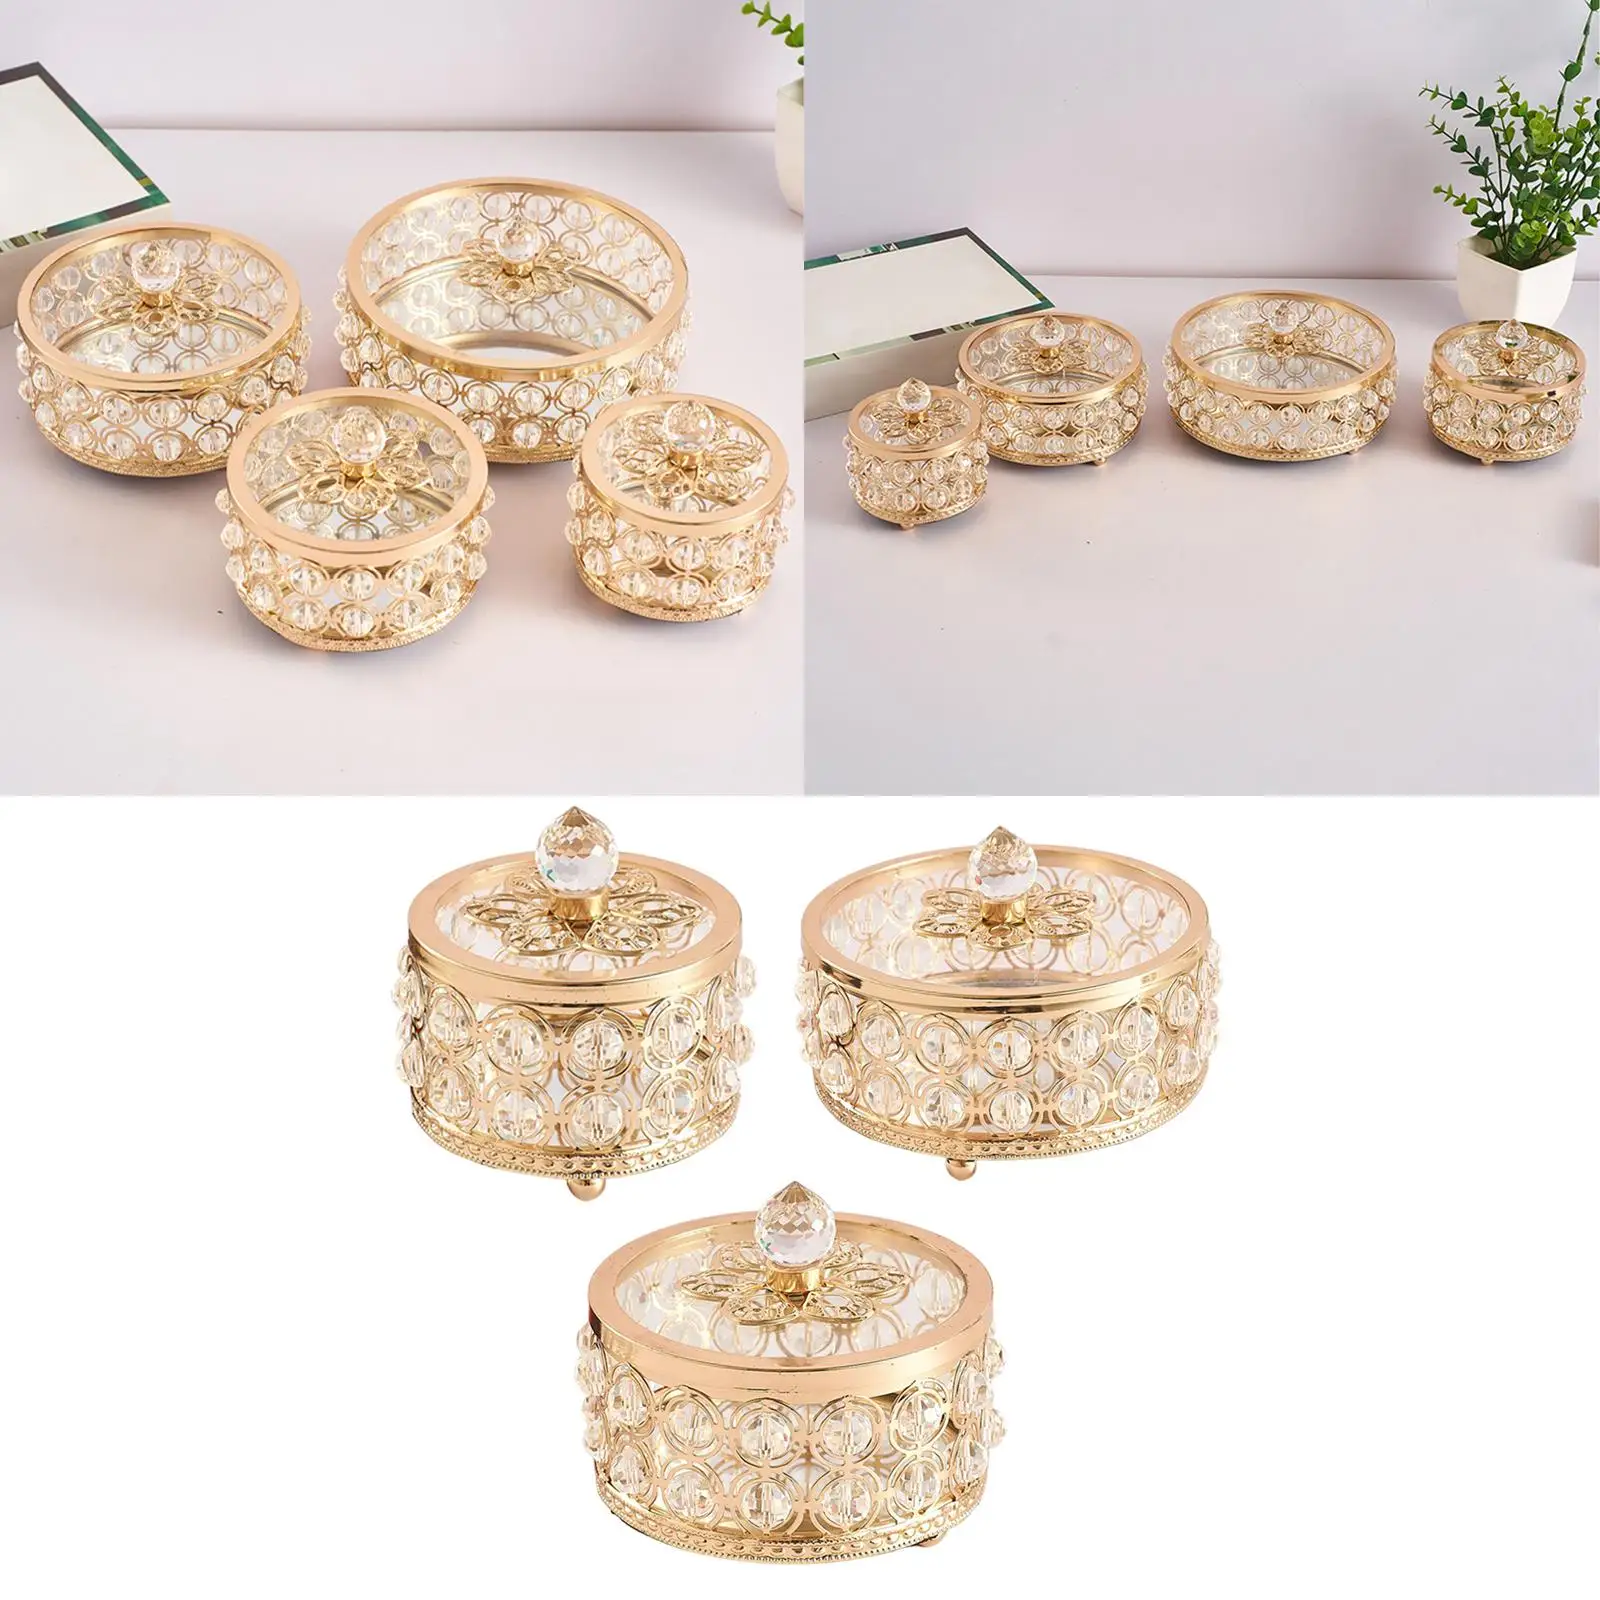 Crystal Jewelry Box Decorative with Lid Holder Gold for Rings Keepsake Box